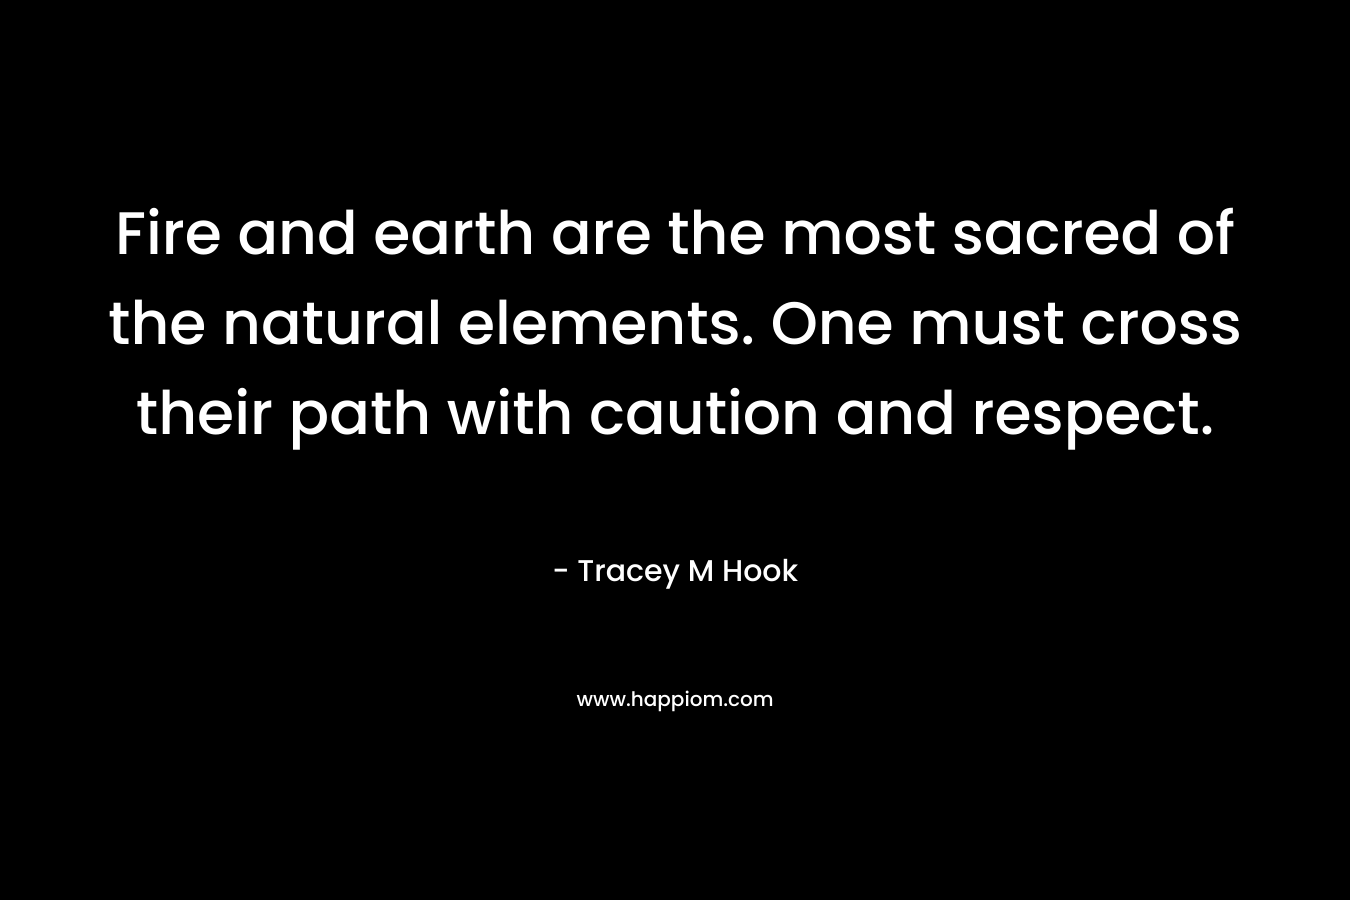 Fire and earth are the most sacred of the natural elements. One must cross their path with caution and respect.